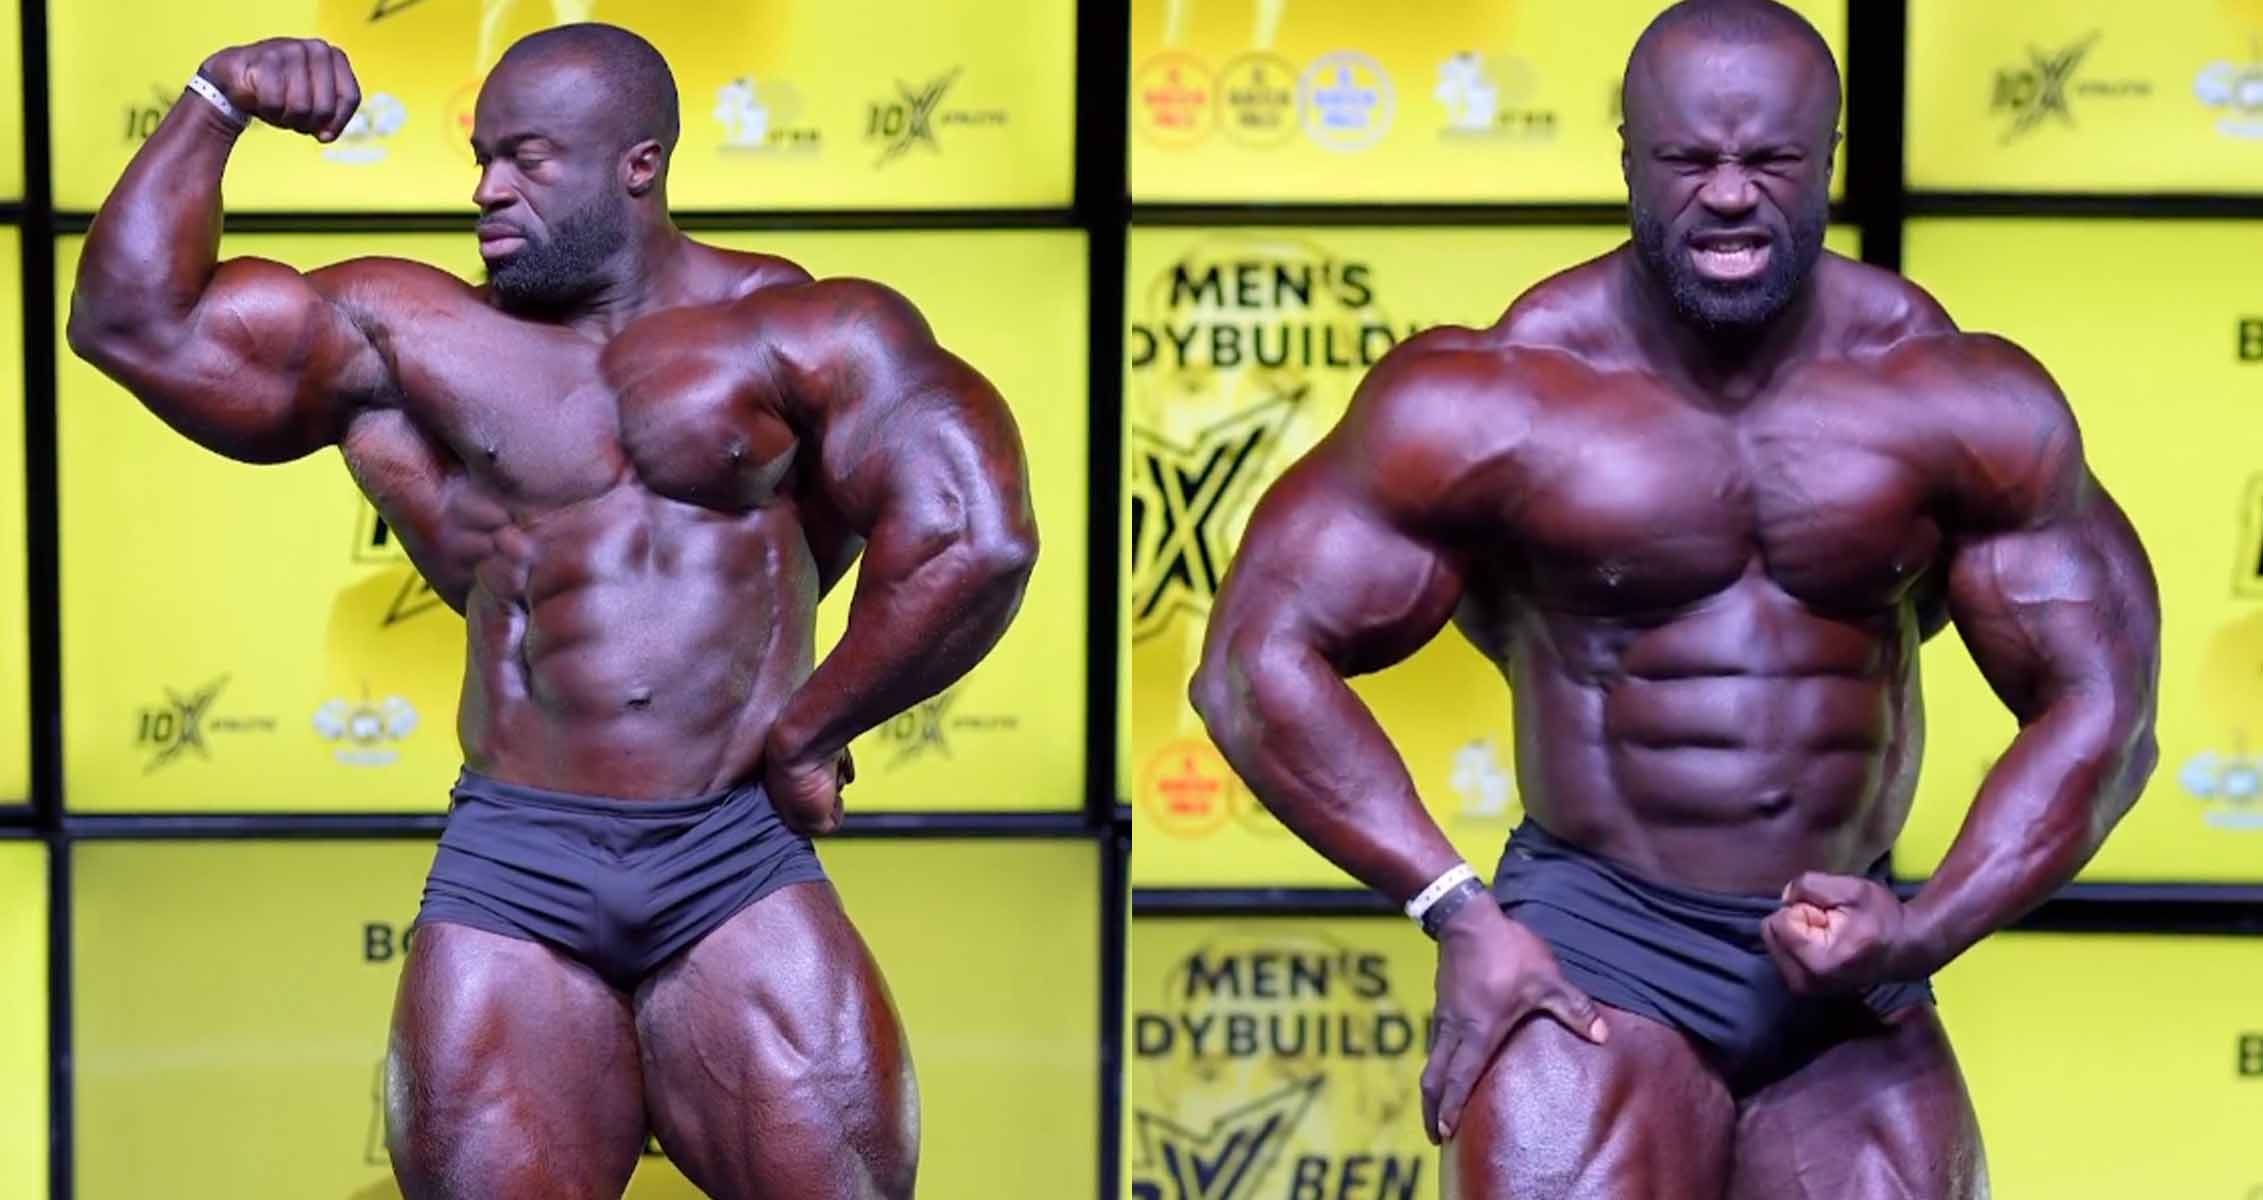 Regan Grimes Offseason Physique Update: Guest Posing At The SE USA 2022